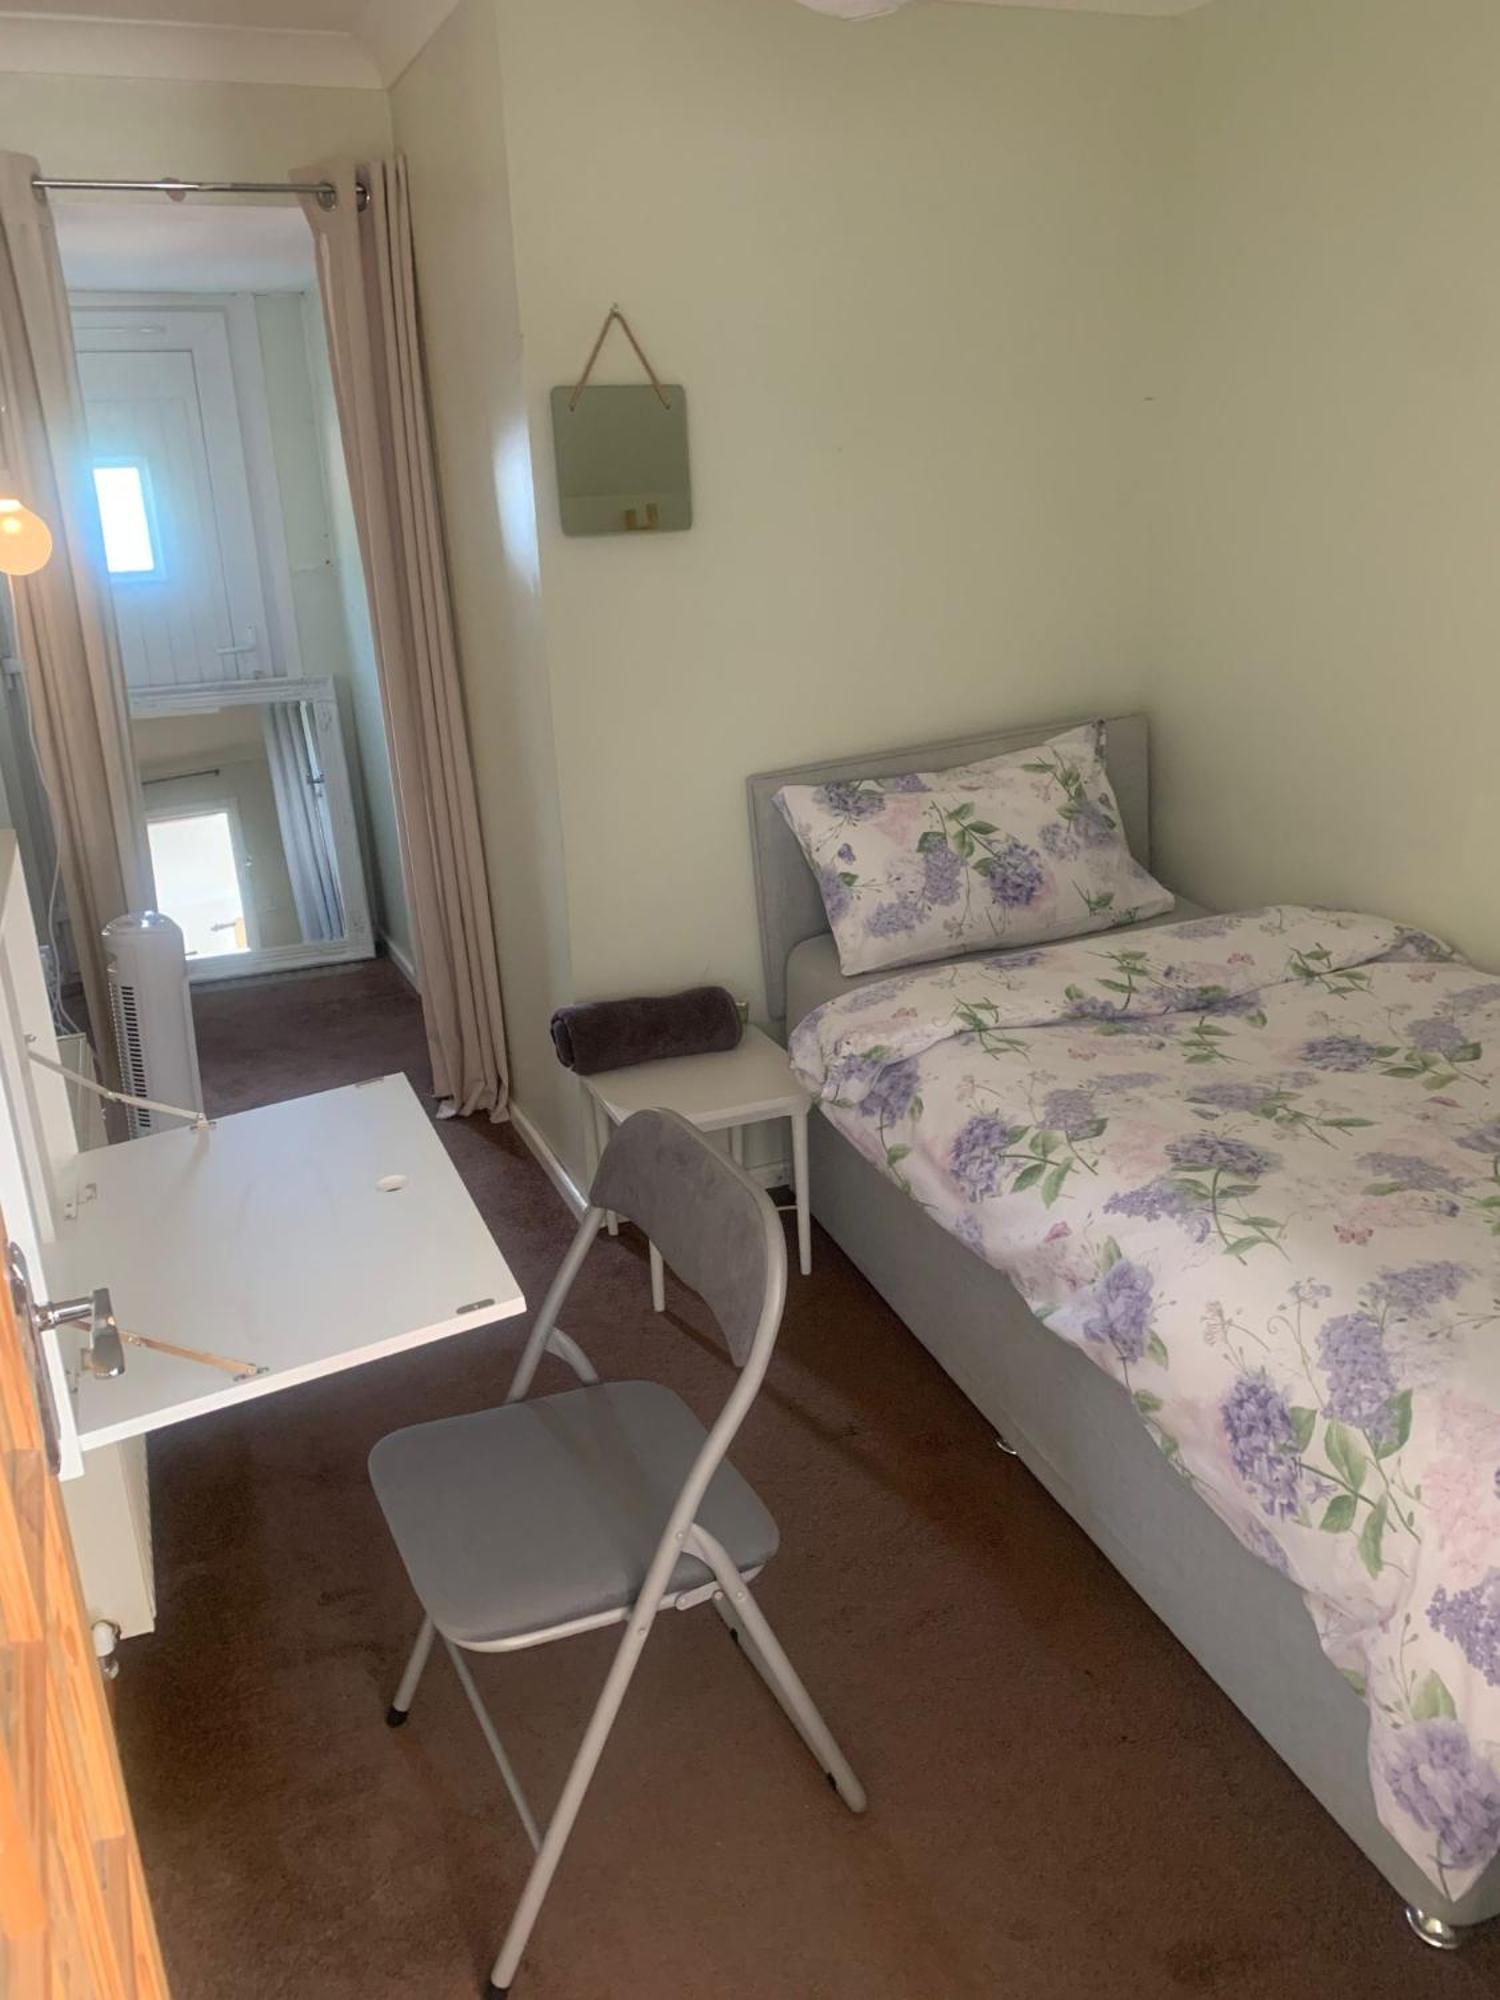 Beaconsfield 4 Bedroom House In Quiet And A Very Pleasant Area, Near London Luton Airport With Free Parking, Fast Wifi, Smart Tv Zewnętrze zdjęcie